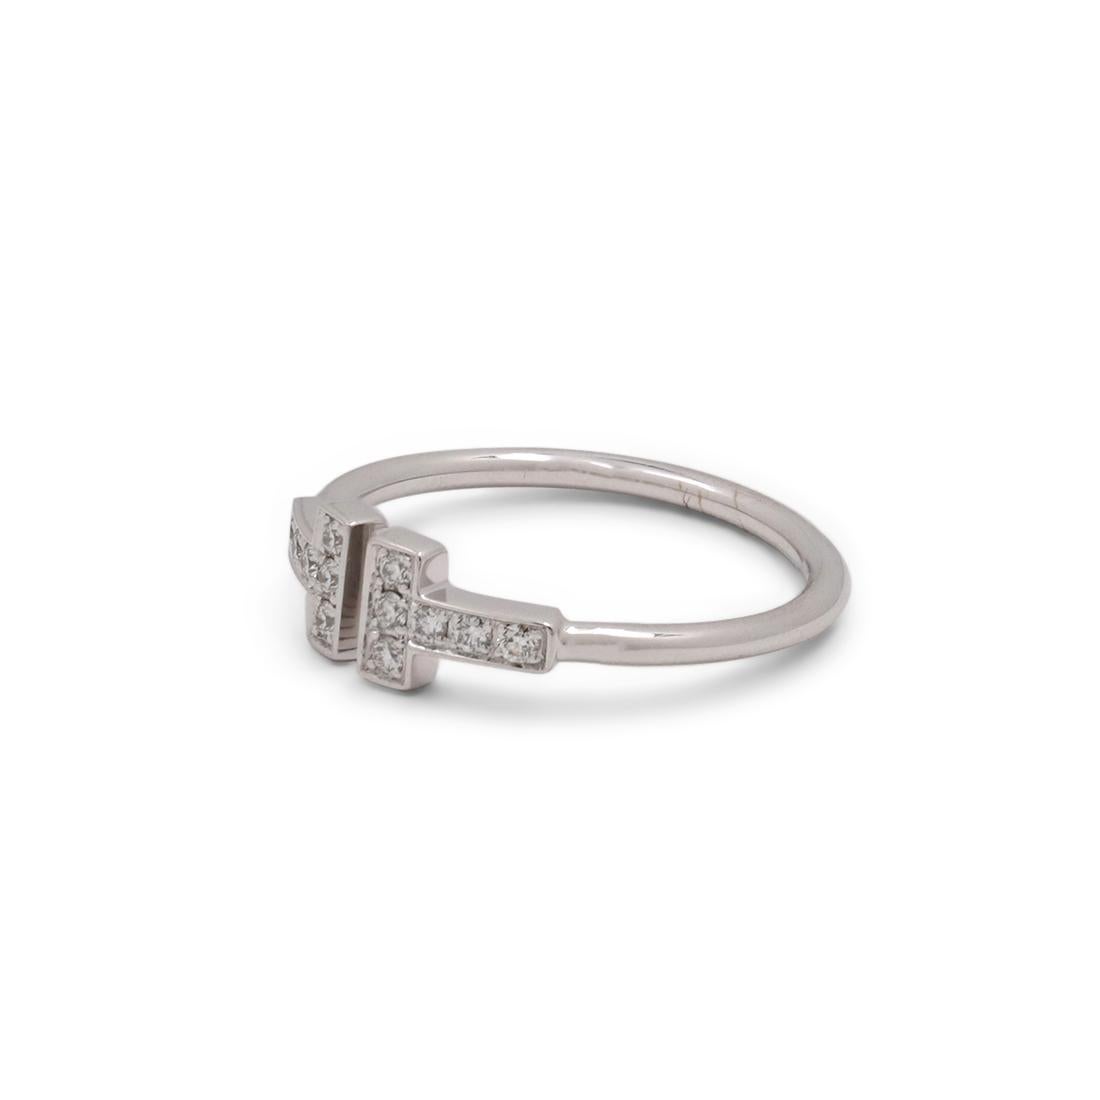 Authentic Tiffany & Co. 'Tiffany T Wire' ring crafted in 18 karat white gold and accented with an estimated 0.13 carts of high quality (G/H color, VS clarity) round brilliant cut diamonds. This stunning ring features a bold 